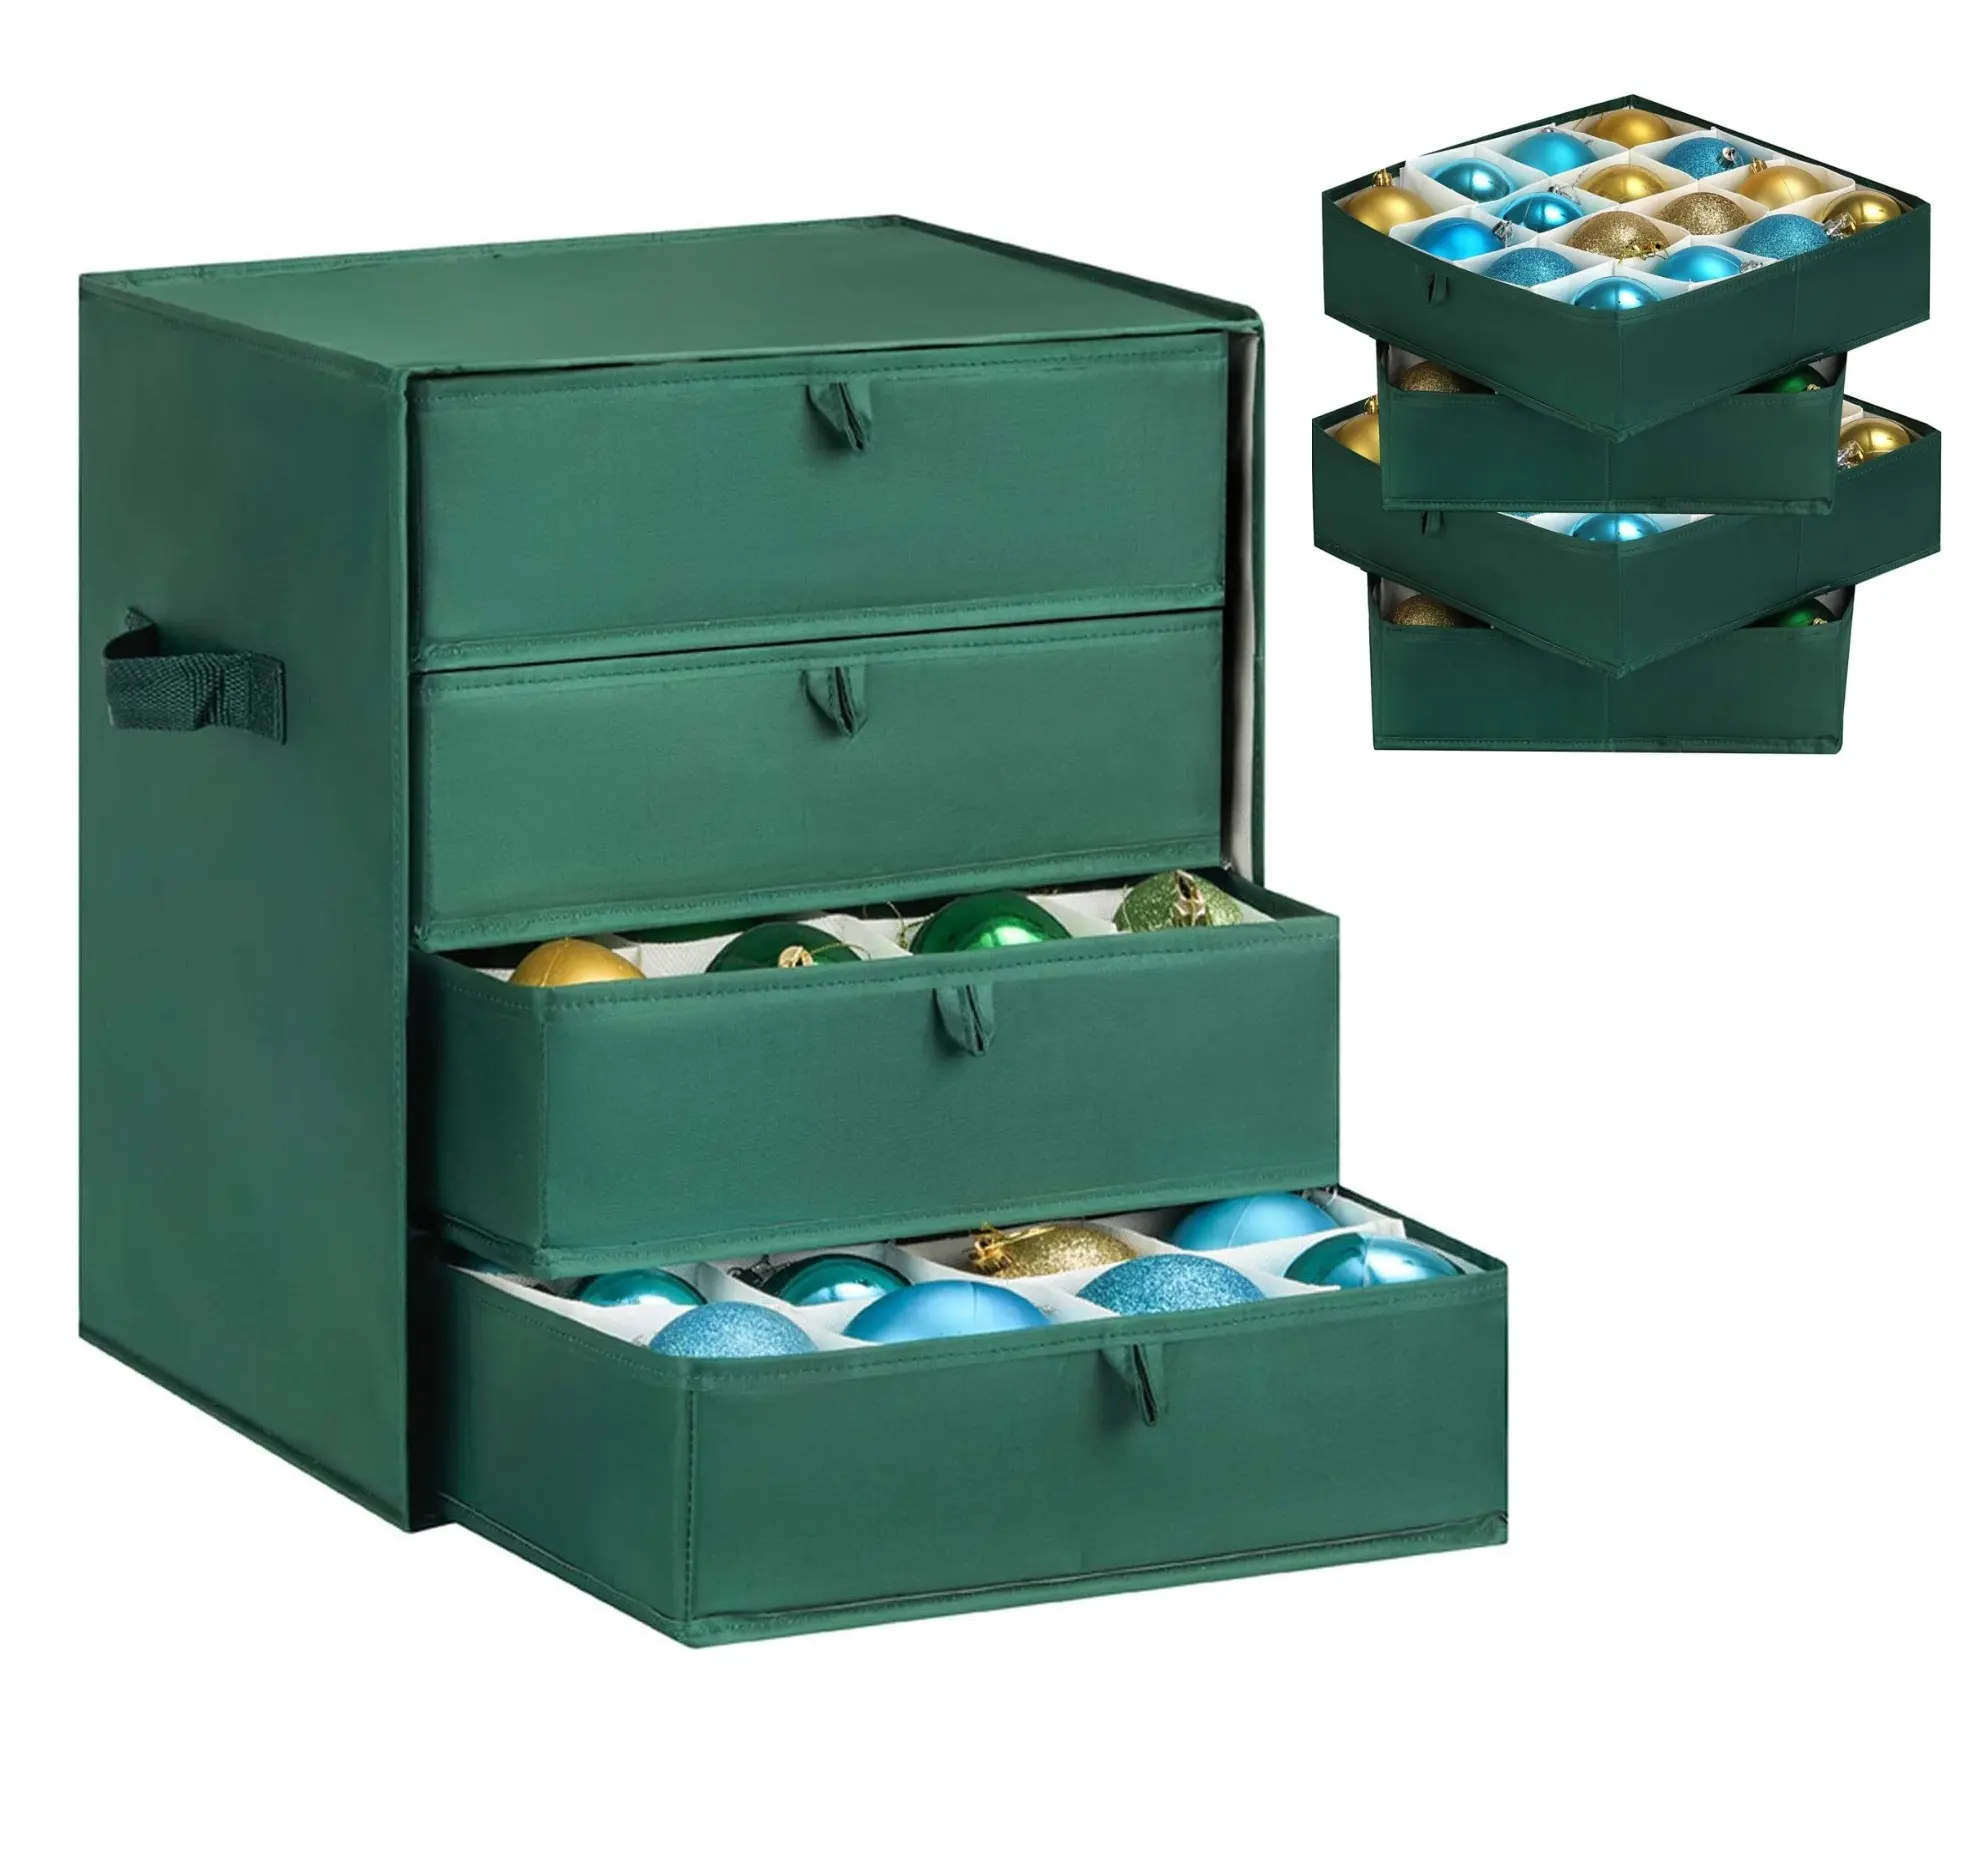 Hot Selling 2019 Foldable Storage Christmas Ornament Storage Used for storing things